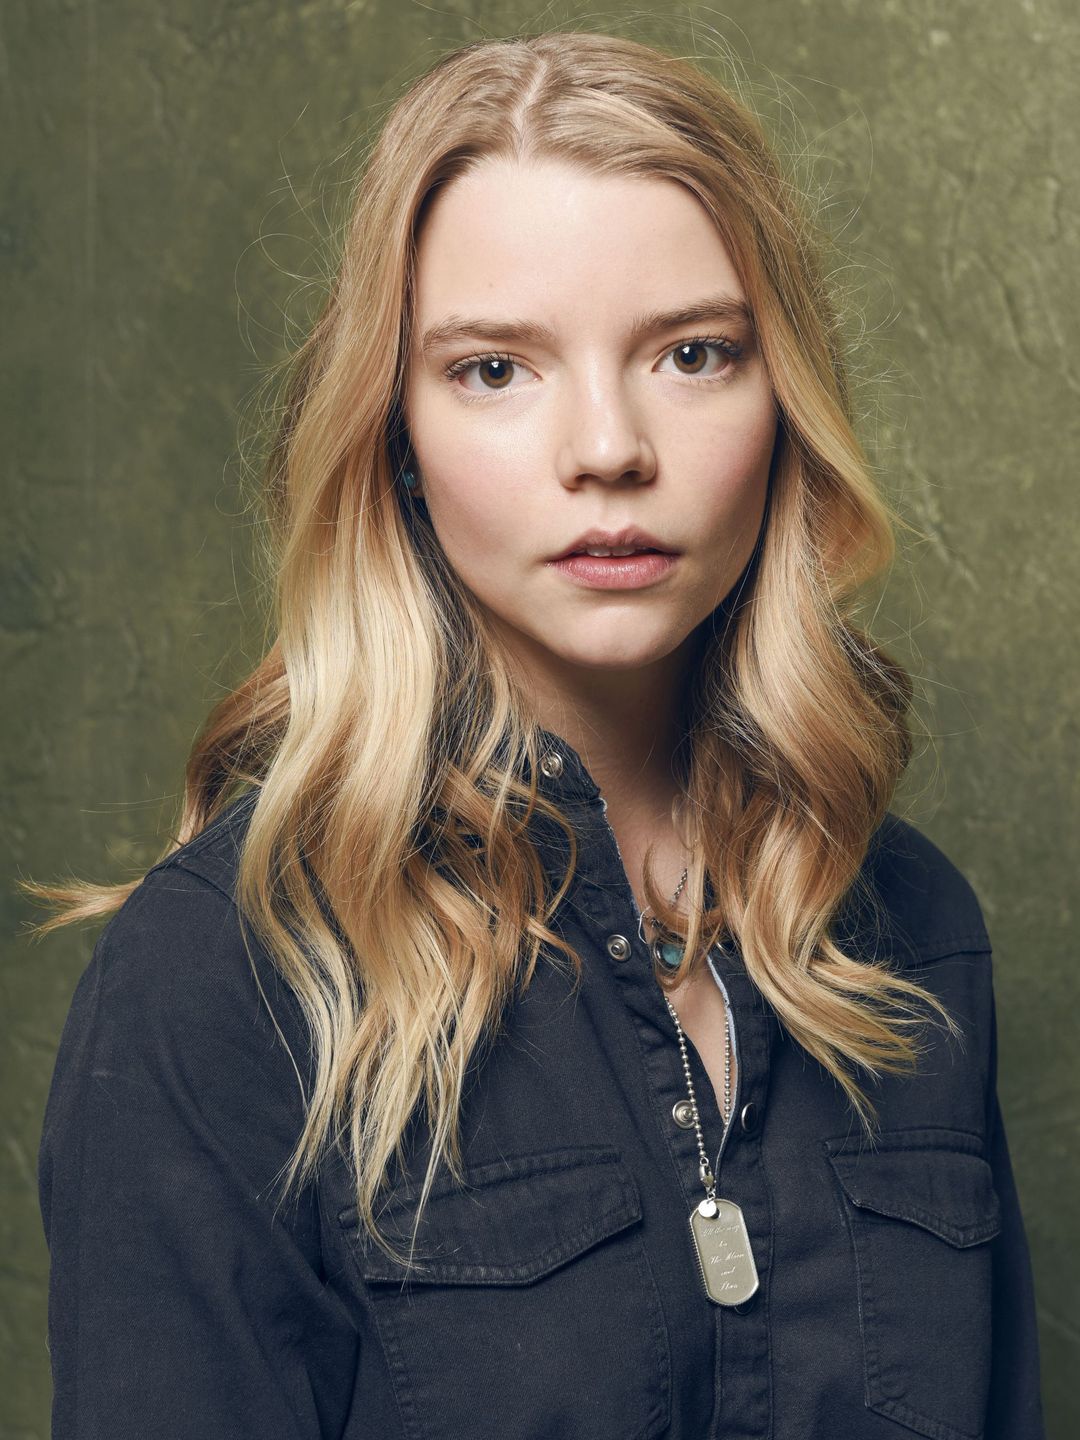 Anya Taylor-Joy who is her father